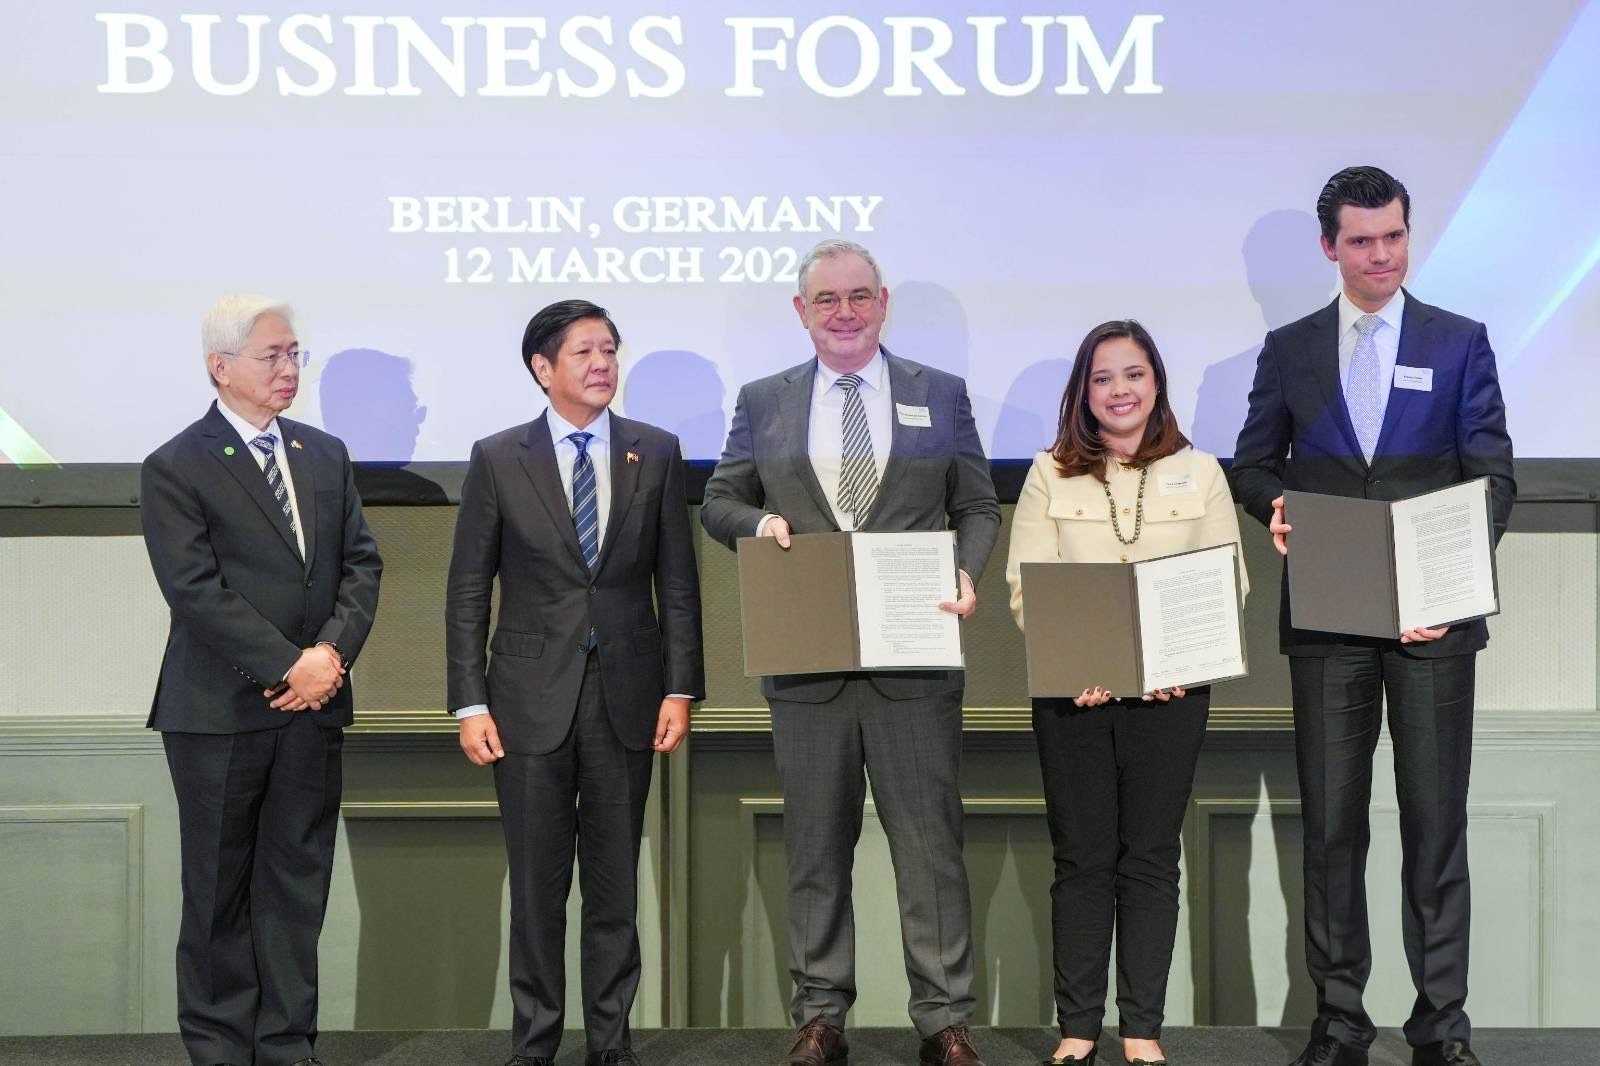 PBBM secures $4 billion investment deals during working visit to Germany